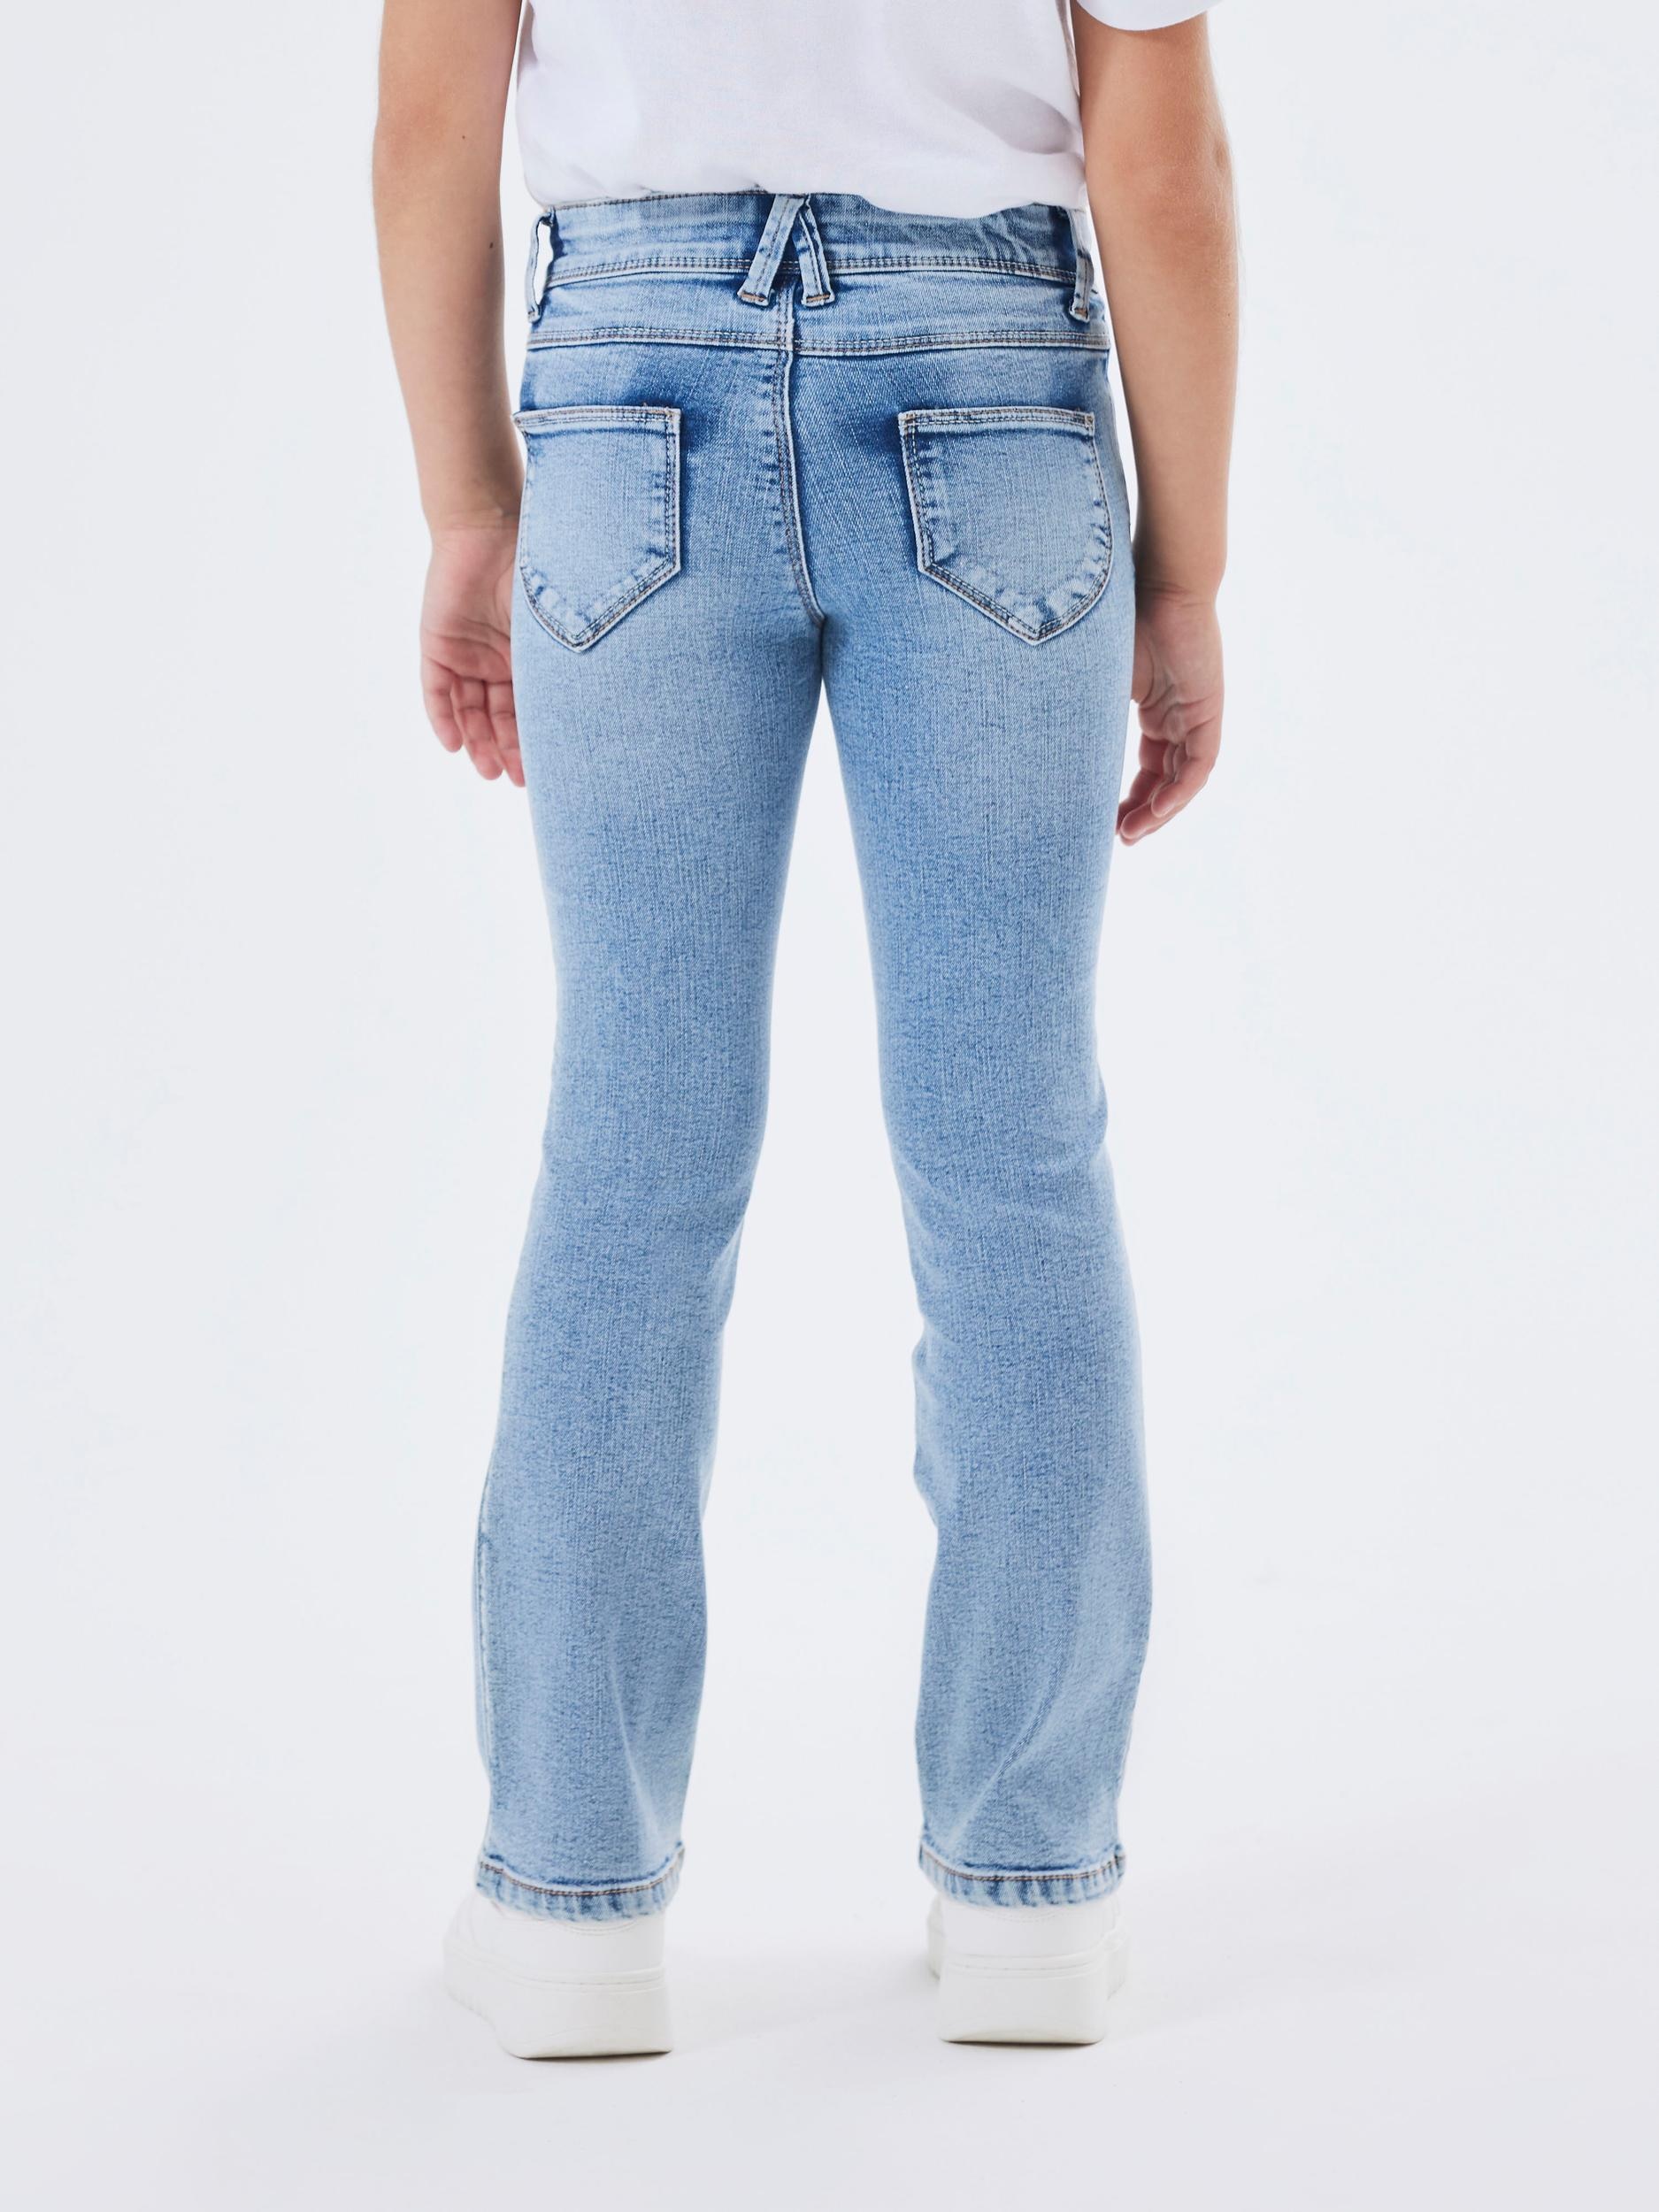 Name JEANS Stretch 1142-AU »NKFPOLLY Bootcut-Jeans NOOS«, BOOT OTTO kaufen mit SKINNY bei It